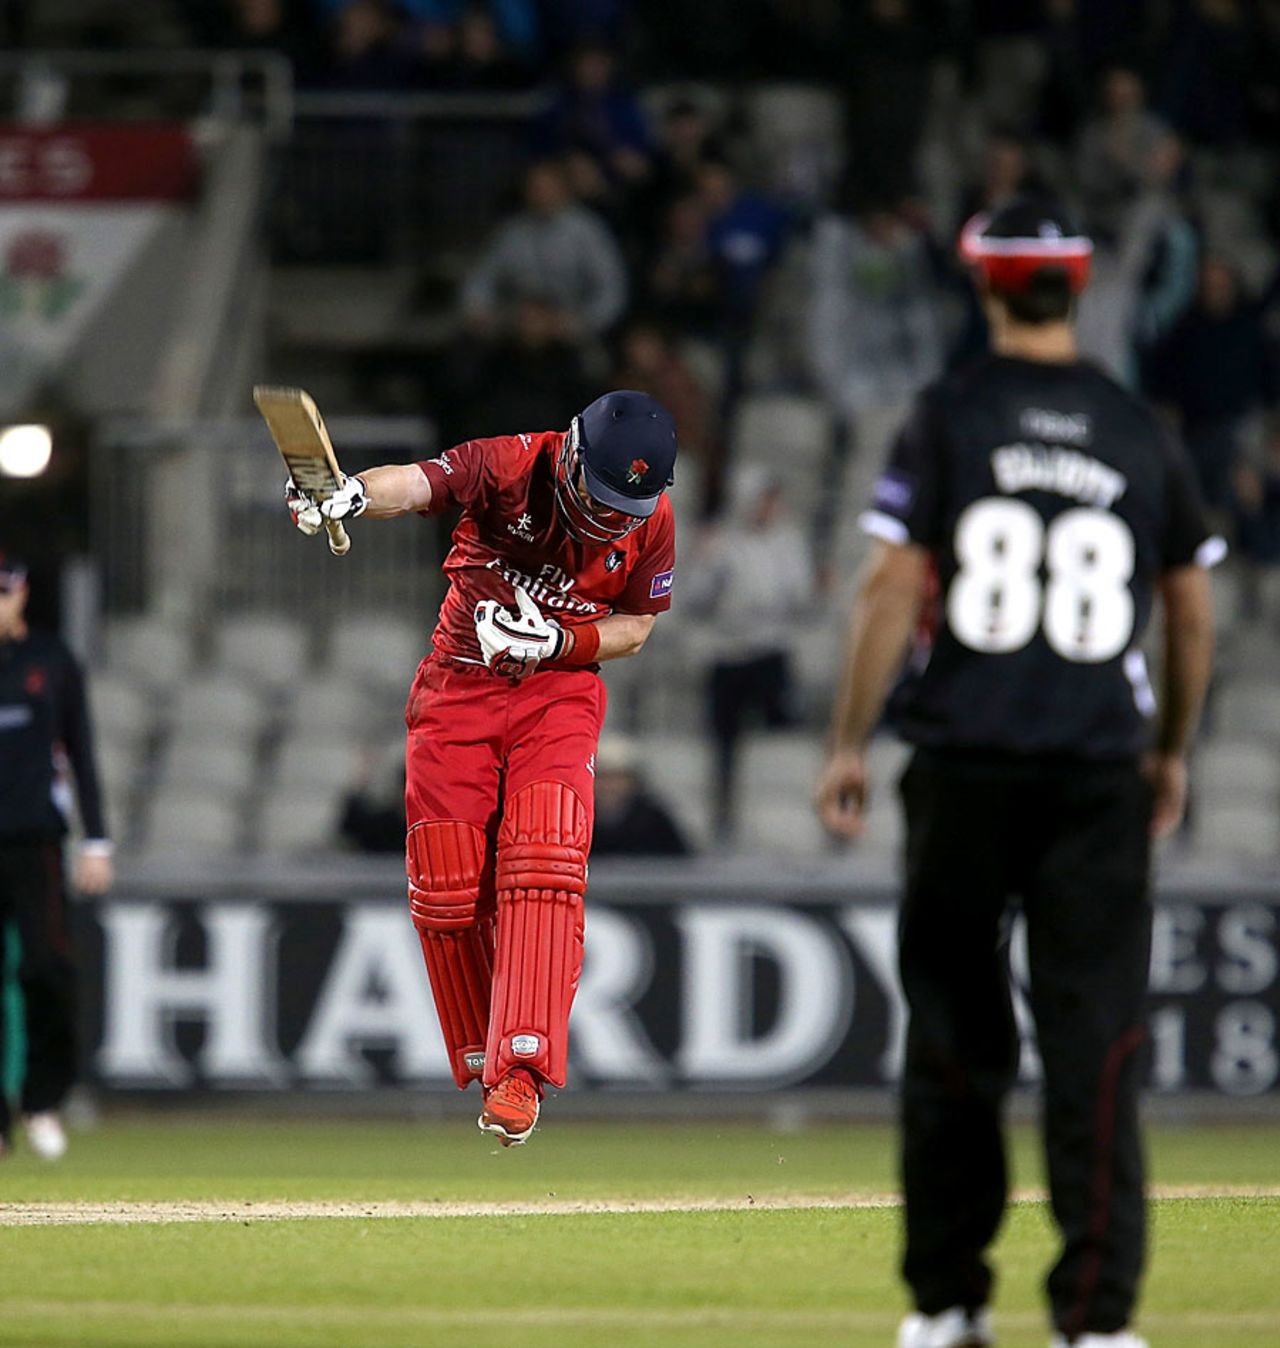 Steven Croft celebrates after hitting a final-ball boundary to win the match, Lancashire v Leicestershire, NatWest Blast, North Group, Old Trafford, May 15, 2015